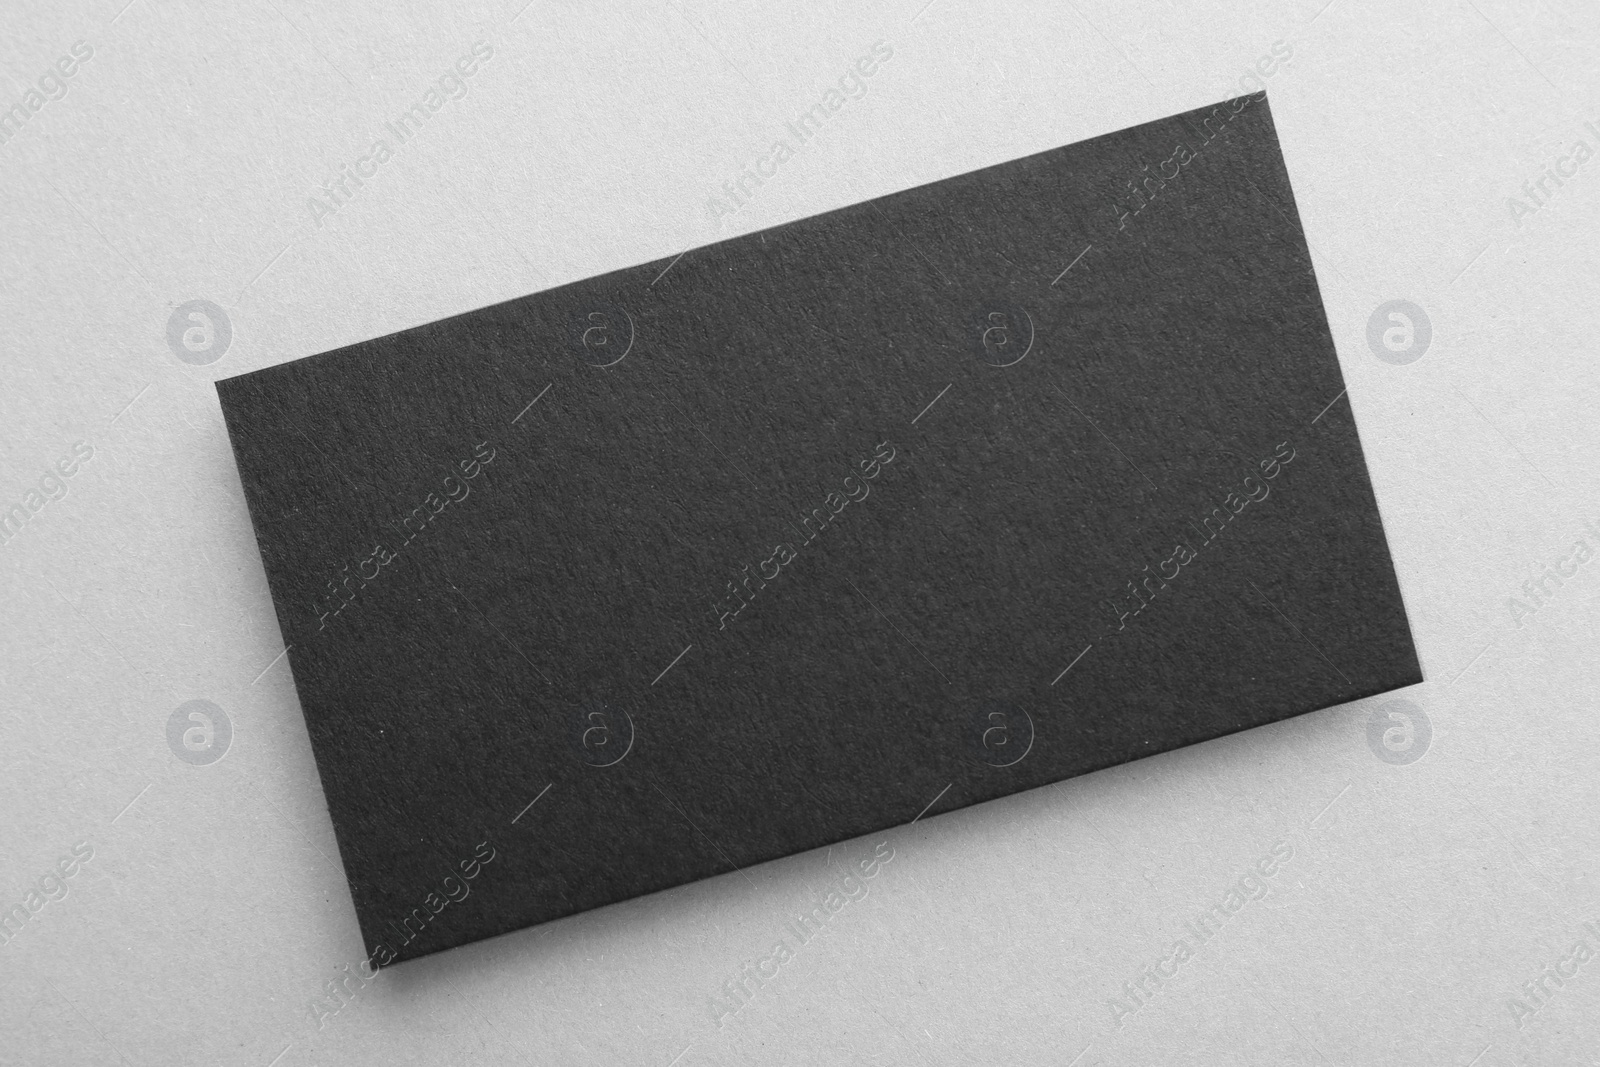 Photo of Blank black business card on light background, top view. Mockup for design